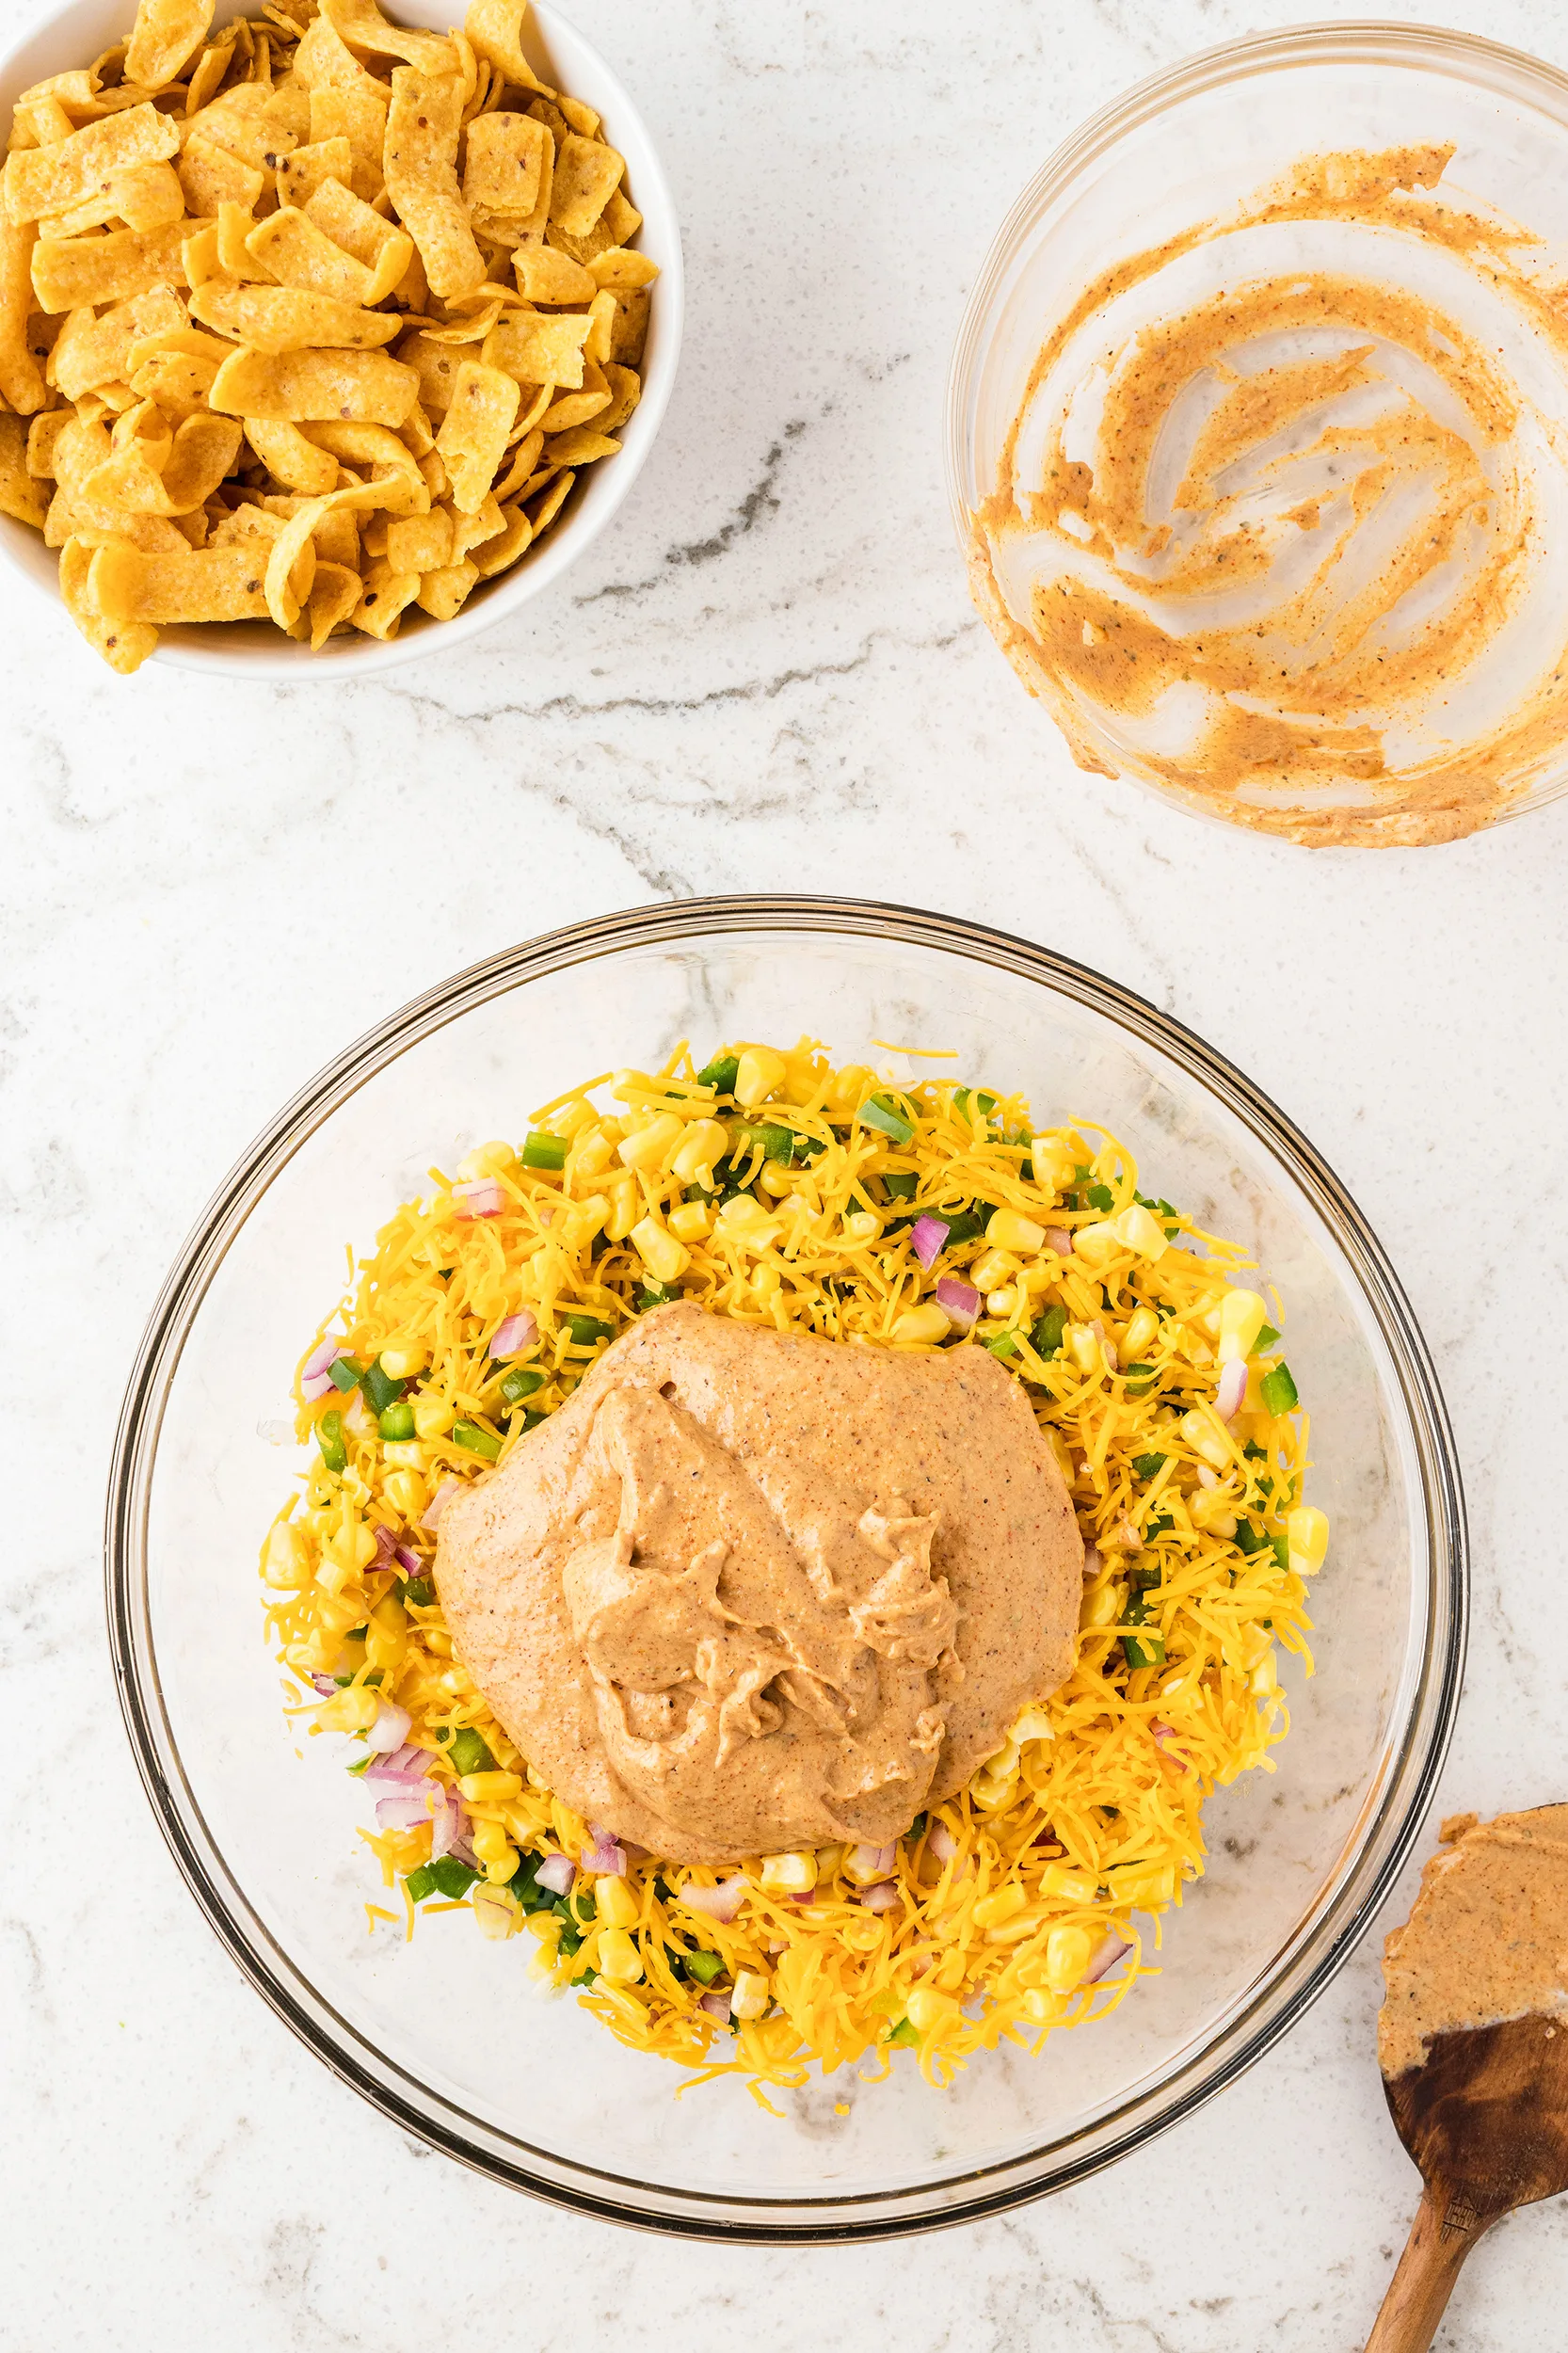 frito corn salad with the sauce pre-mixing in a glass bowl